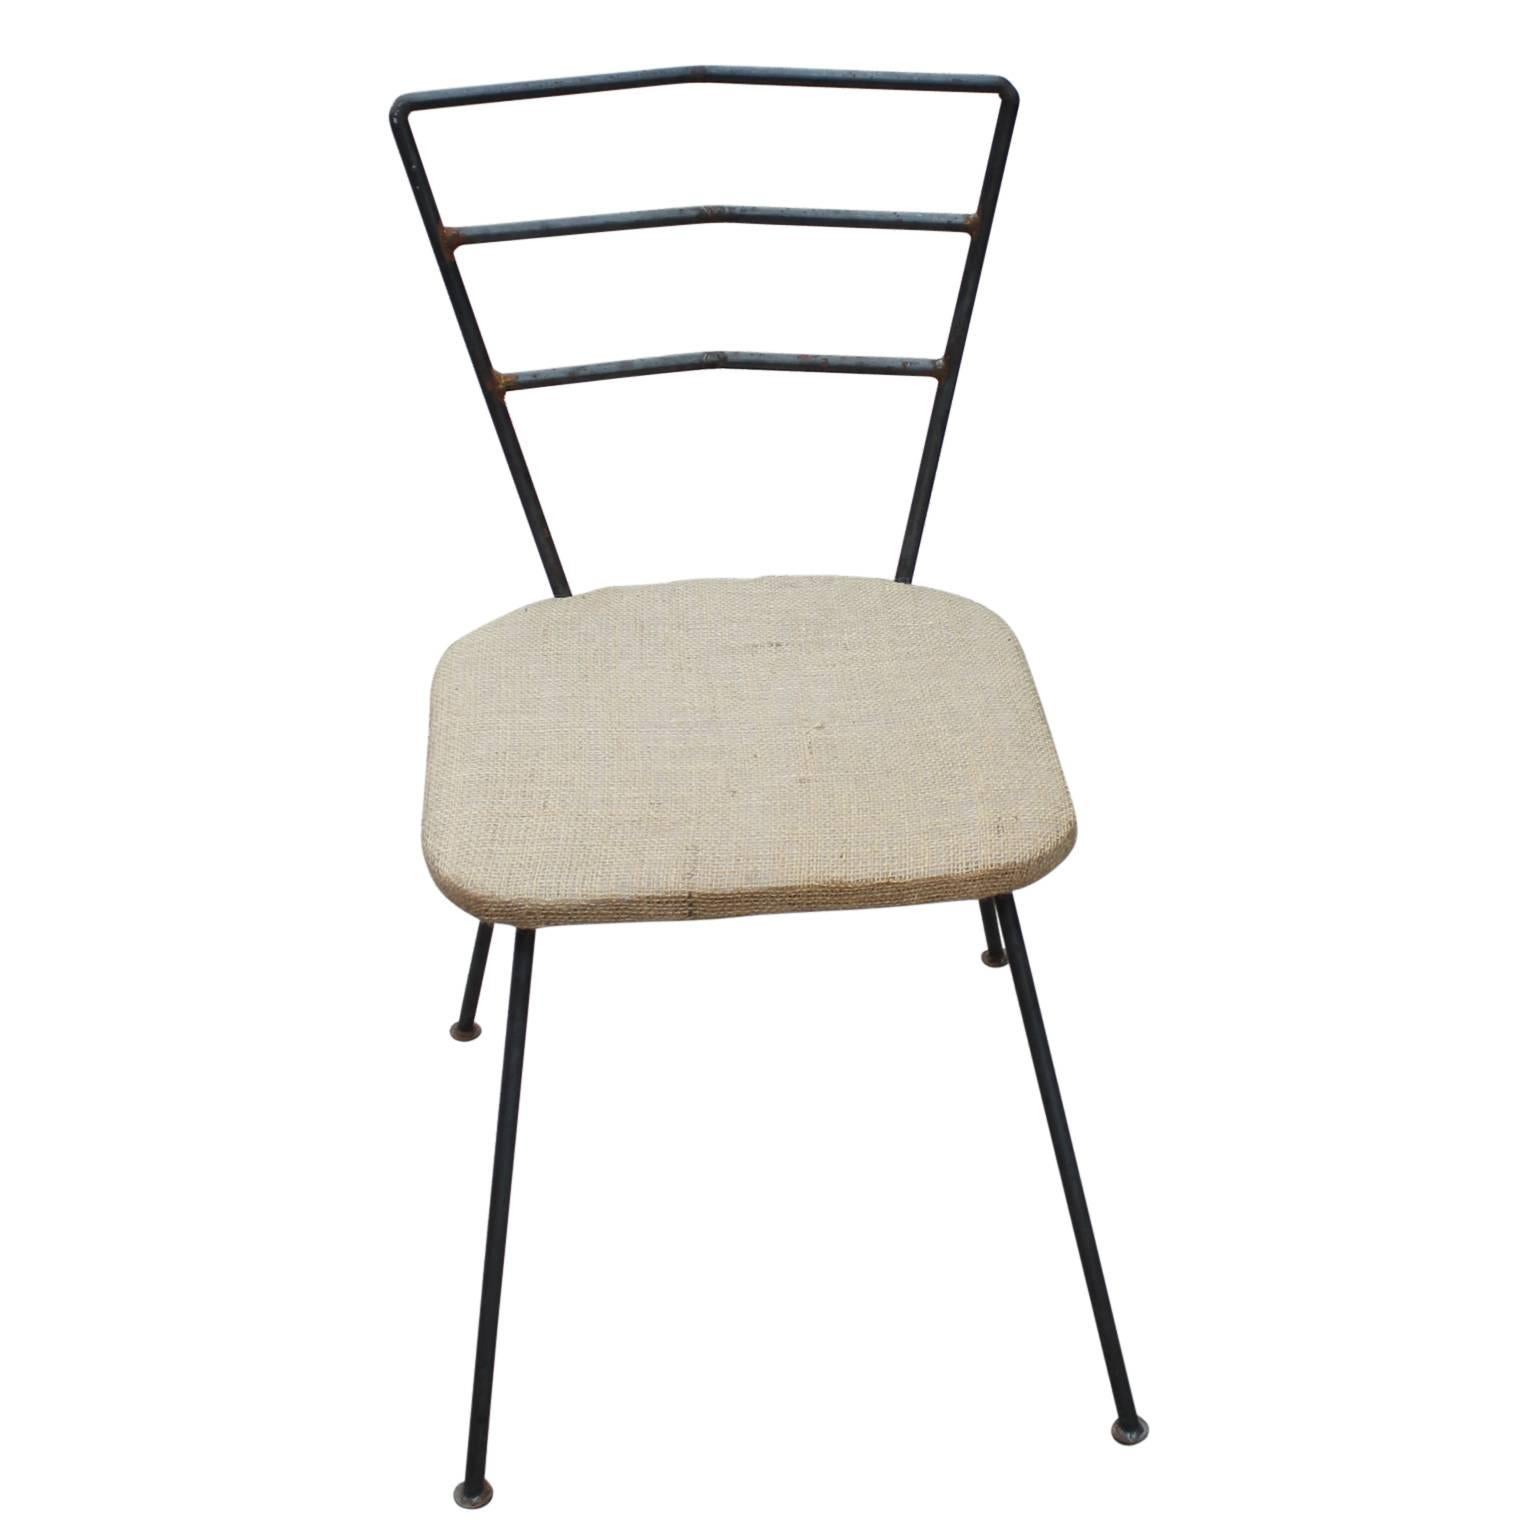 Set of 12 modern iron ladder back dining chairs with canvas seats.